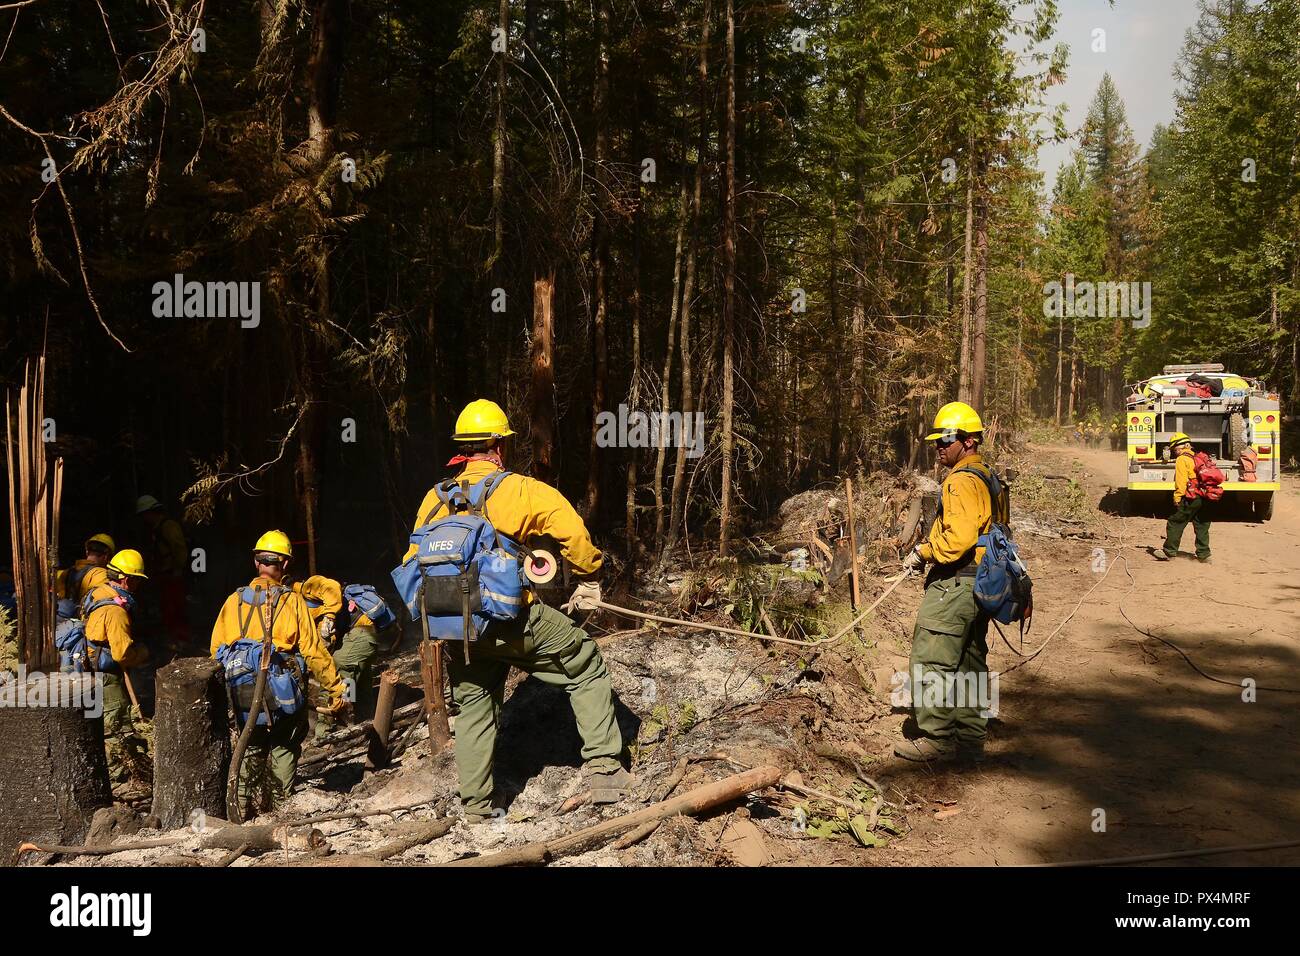 Airmen from the Washington Air National Guard work as a team to pull a long hose from an an emergency support vehicle (visible at right background) toward a forested area while fighting the Sheep Creek Fire, located in the Sheep Creek area near Northport, Washington, USA, image courtesy Technical sergeant Timothy Chacon and the Joint Forces Headquarters, Washington National Guard, August 6, 2018. () Stock Photo